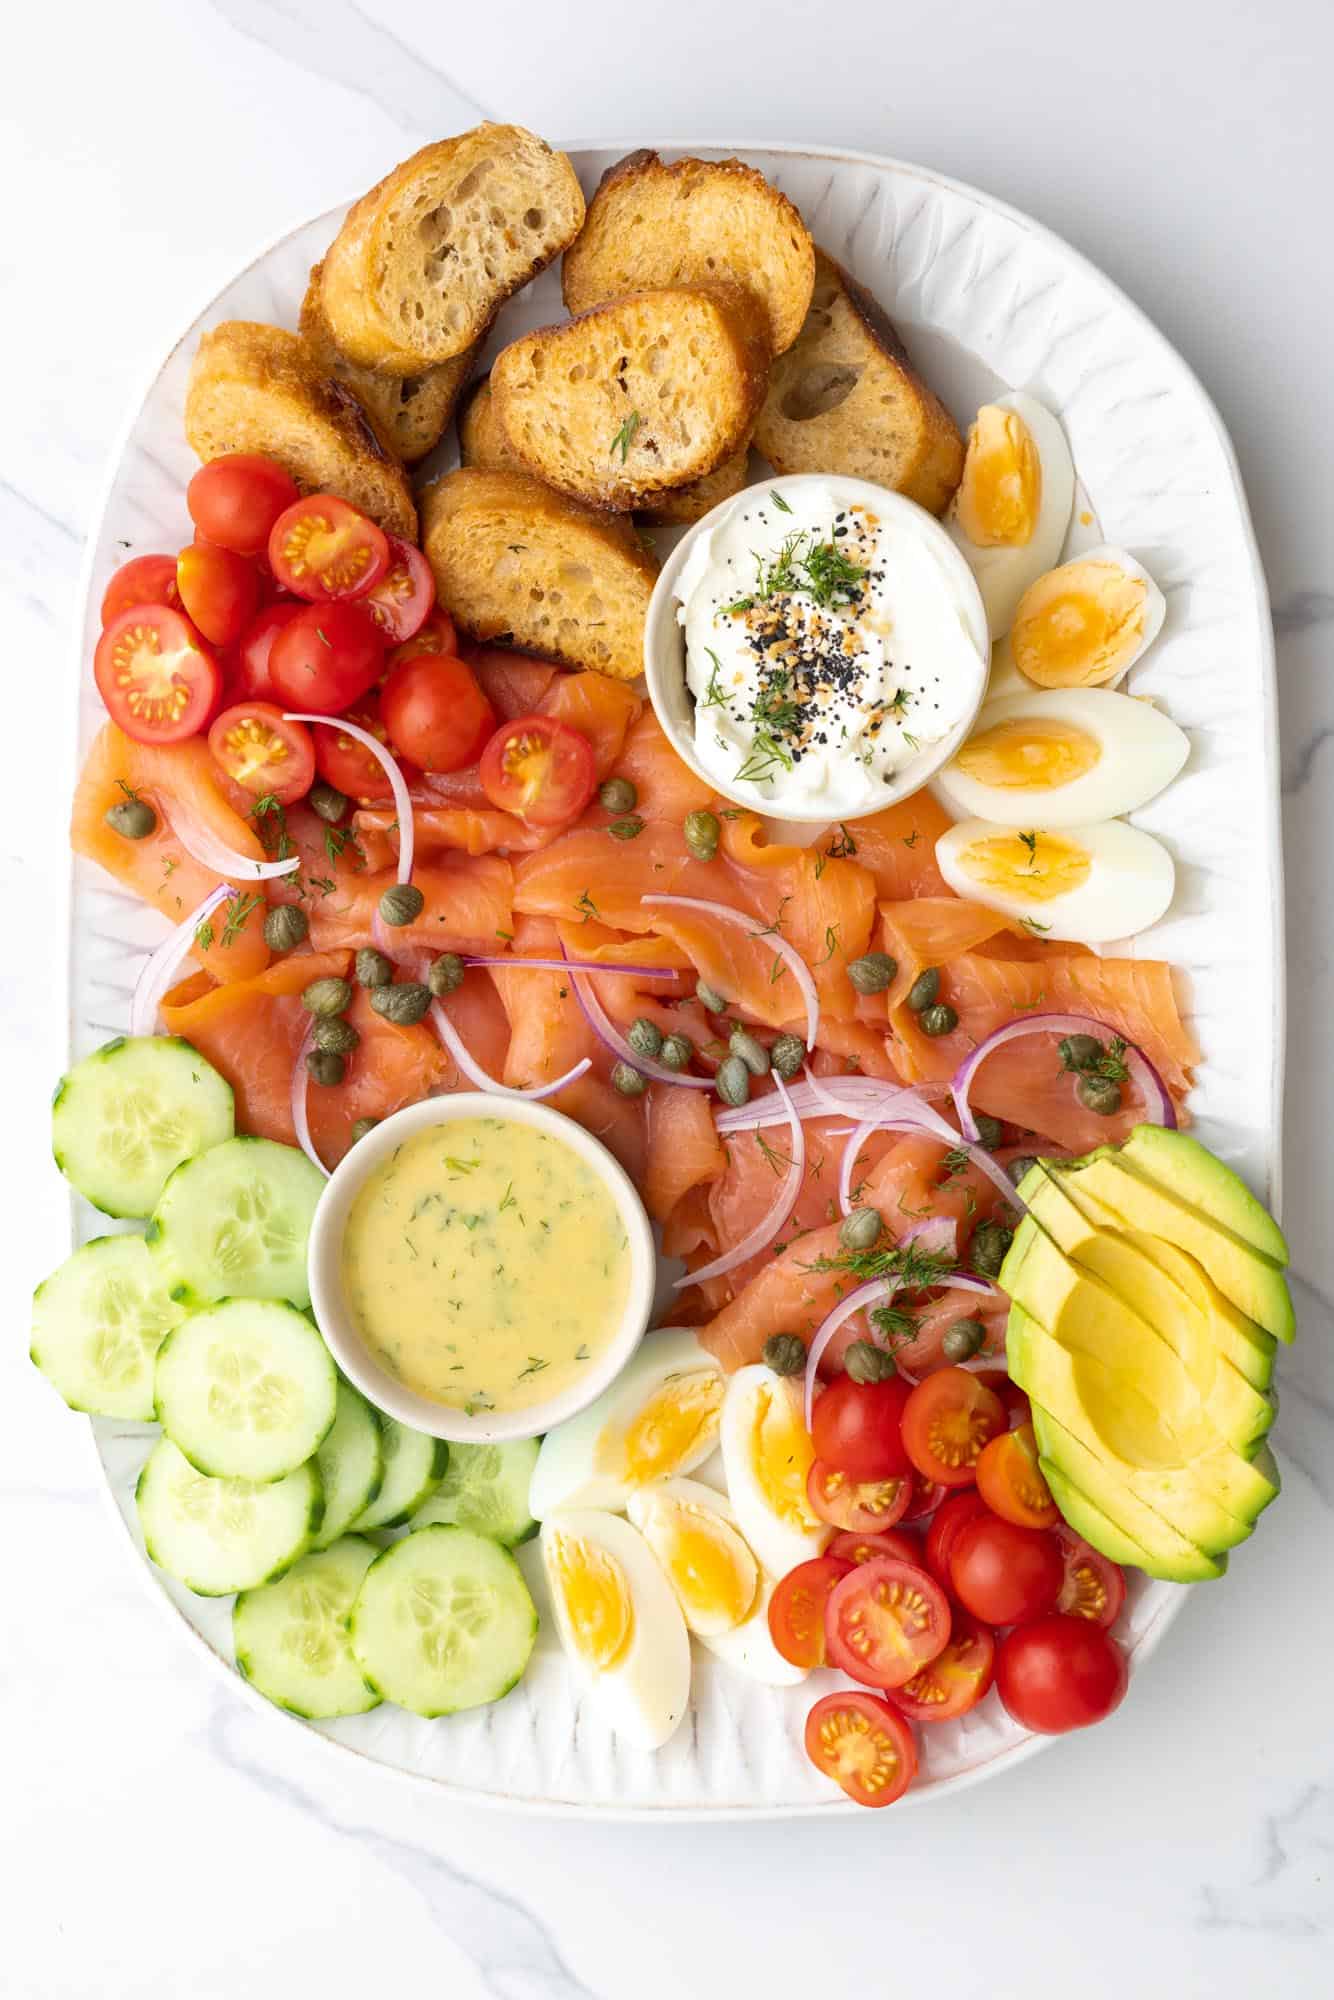 a filled rectangular white platter holding artfully arranged smoked salmon and toppings for bagels or crostini.